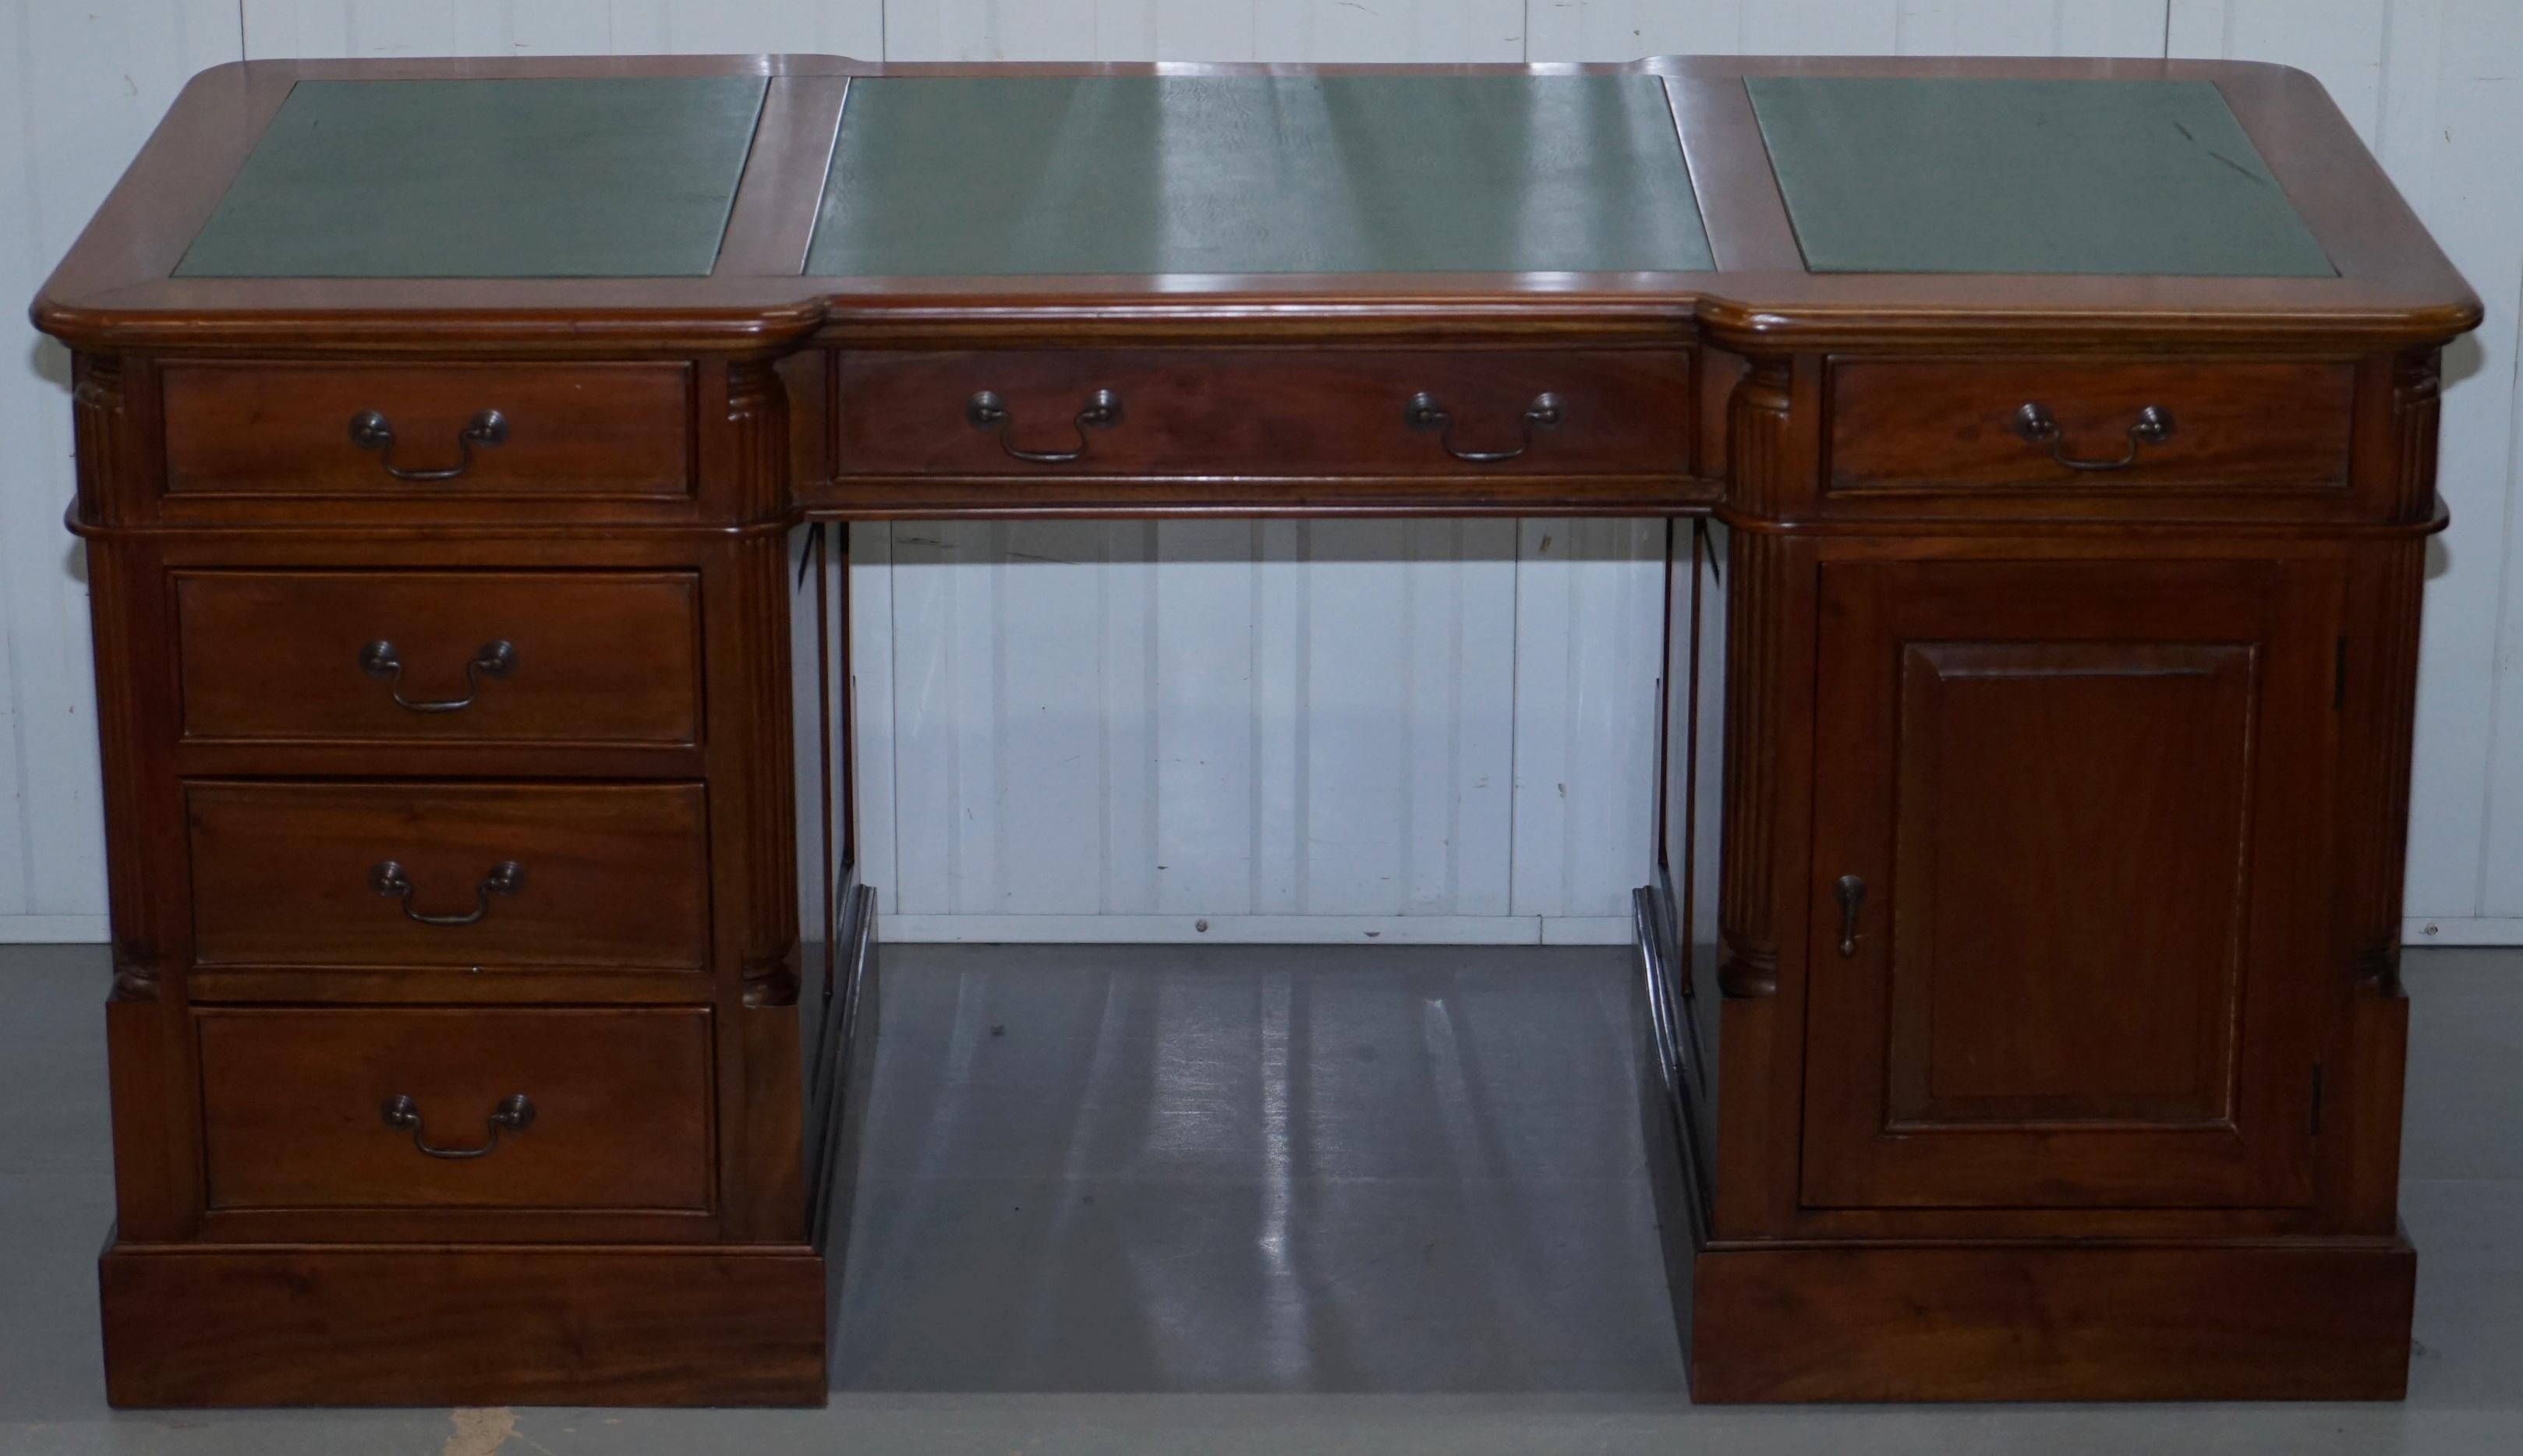 We are delighted to offer for sale this large twin pedestal partner desk finished in solid mahogany and with a green leather top, drawers and cupboards to both sides

A very good looking and well-made desk with a lovely timber patina, it's hardly